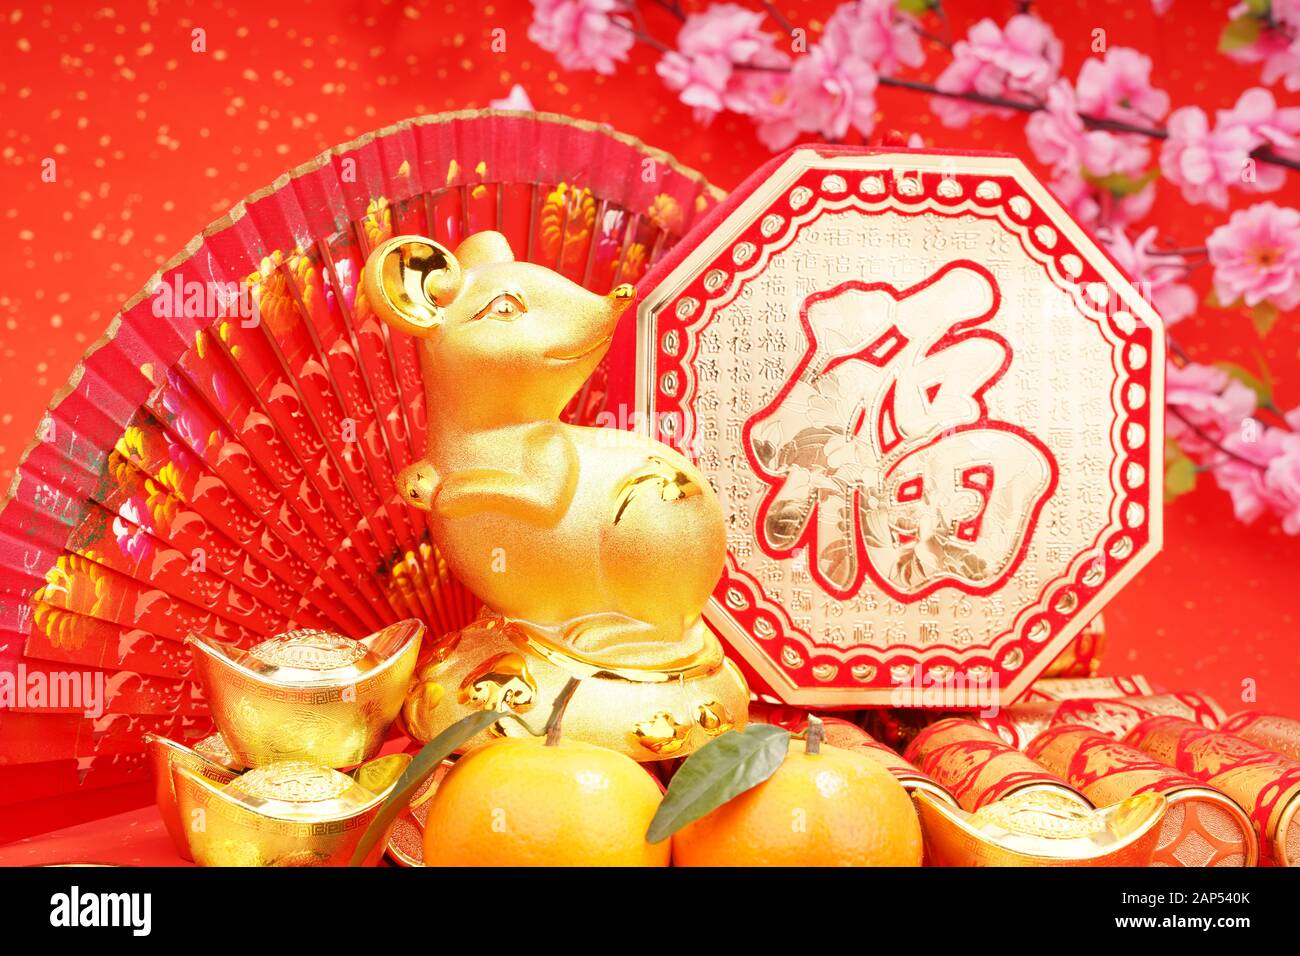 Tradition Chinese golden rat statue rat,2020 is year of the rat,Chinese characters on gold ingot translation: good bless for money. Stock Photo